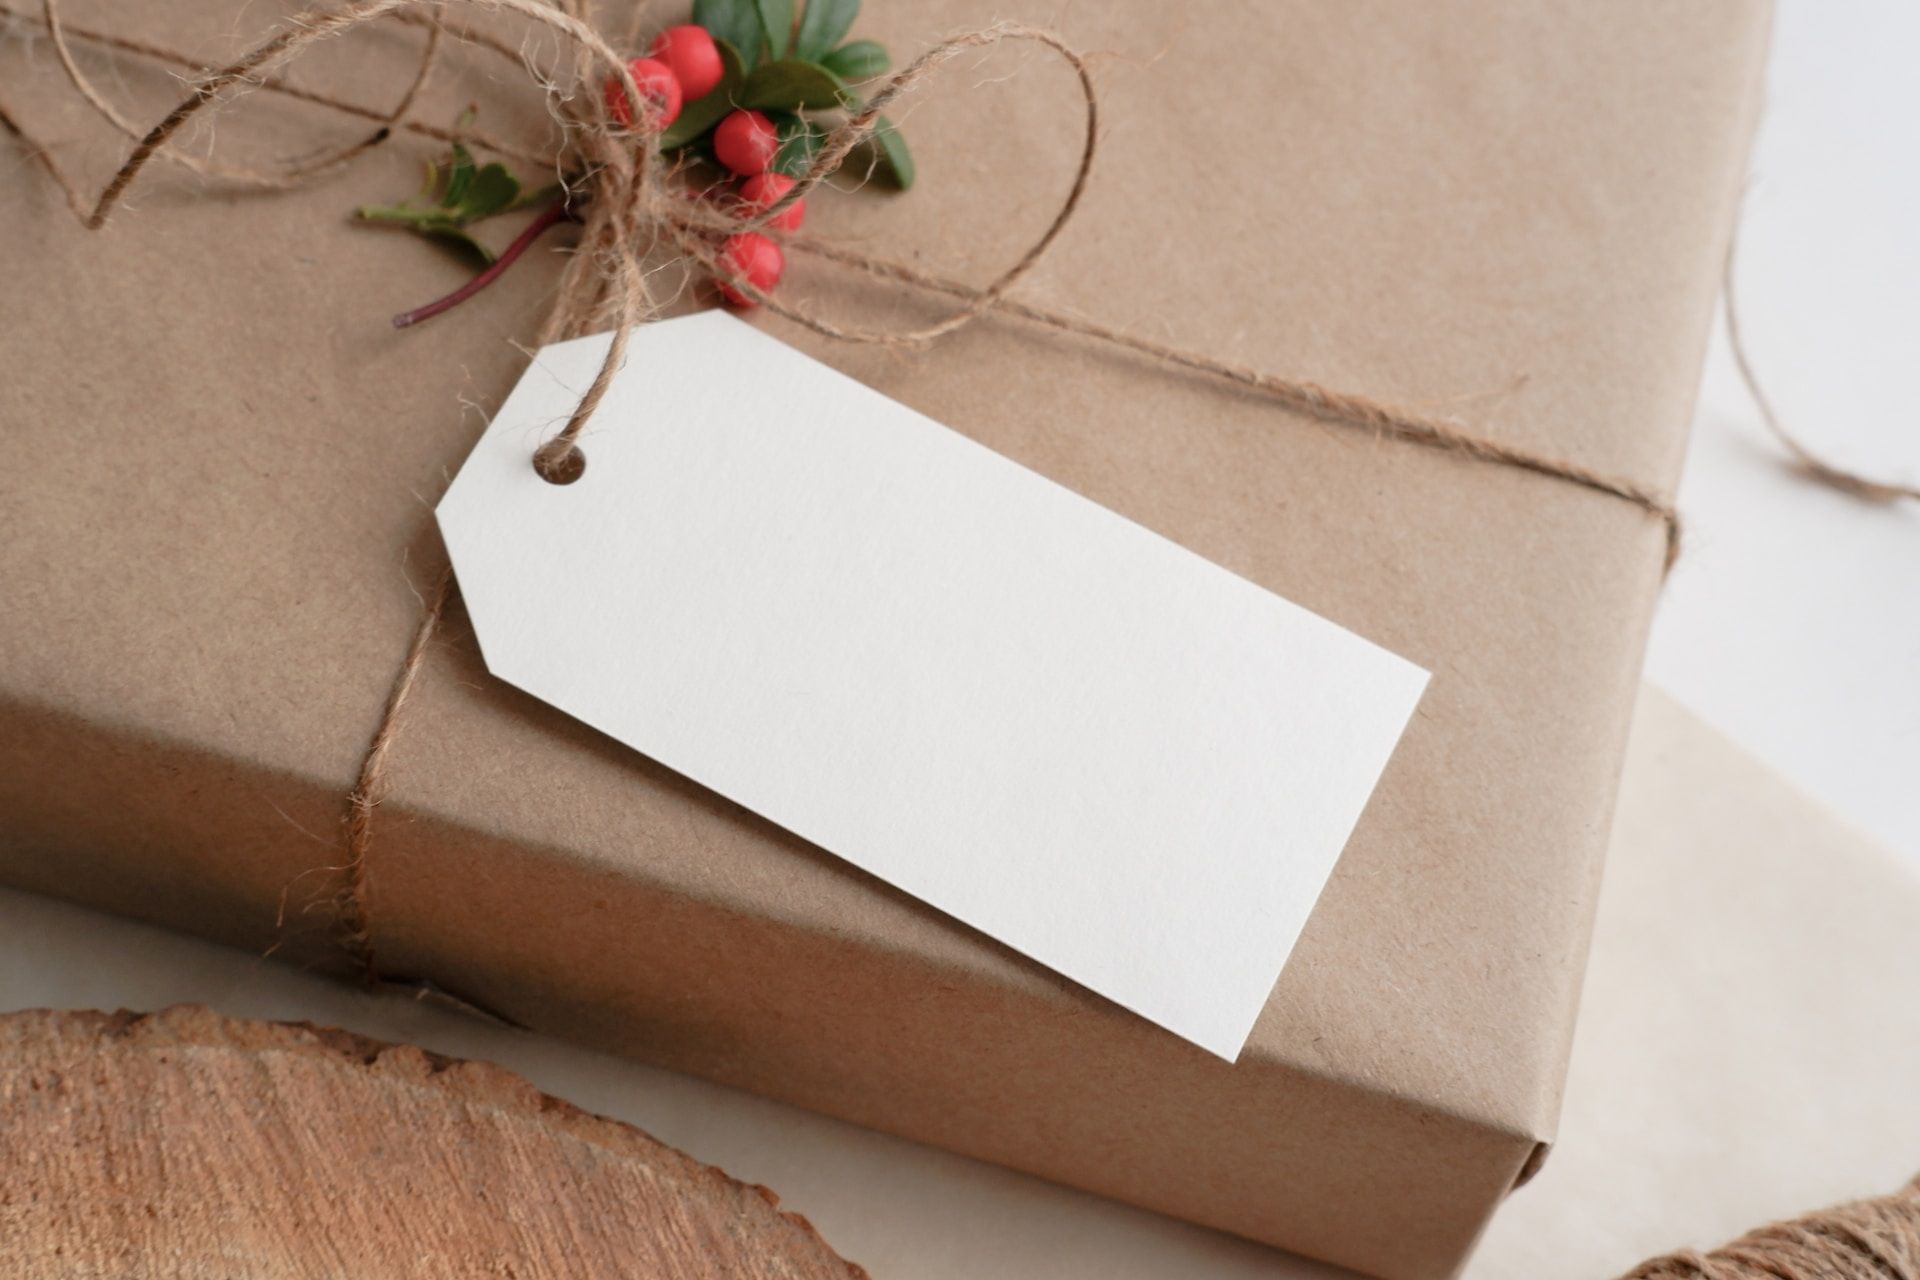 giftbox with a gift tag